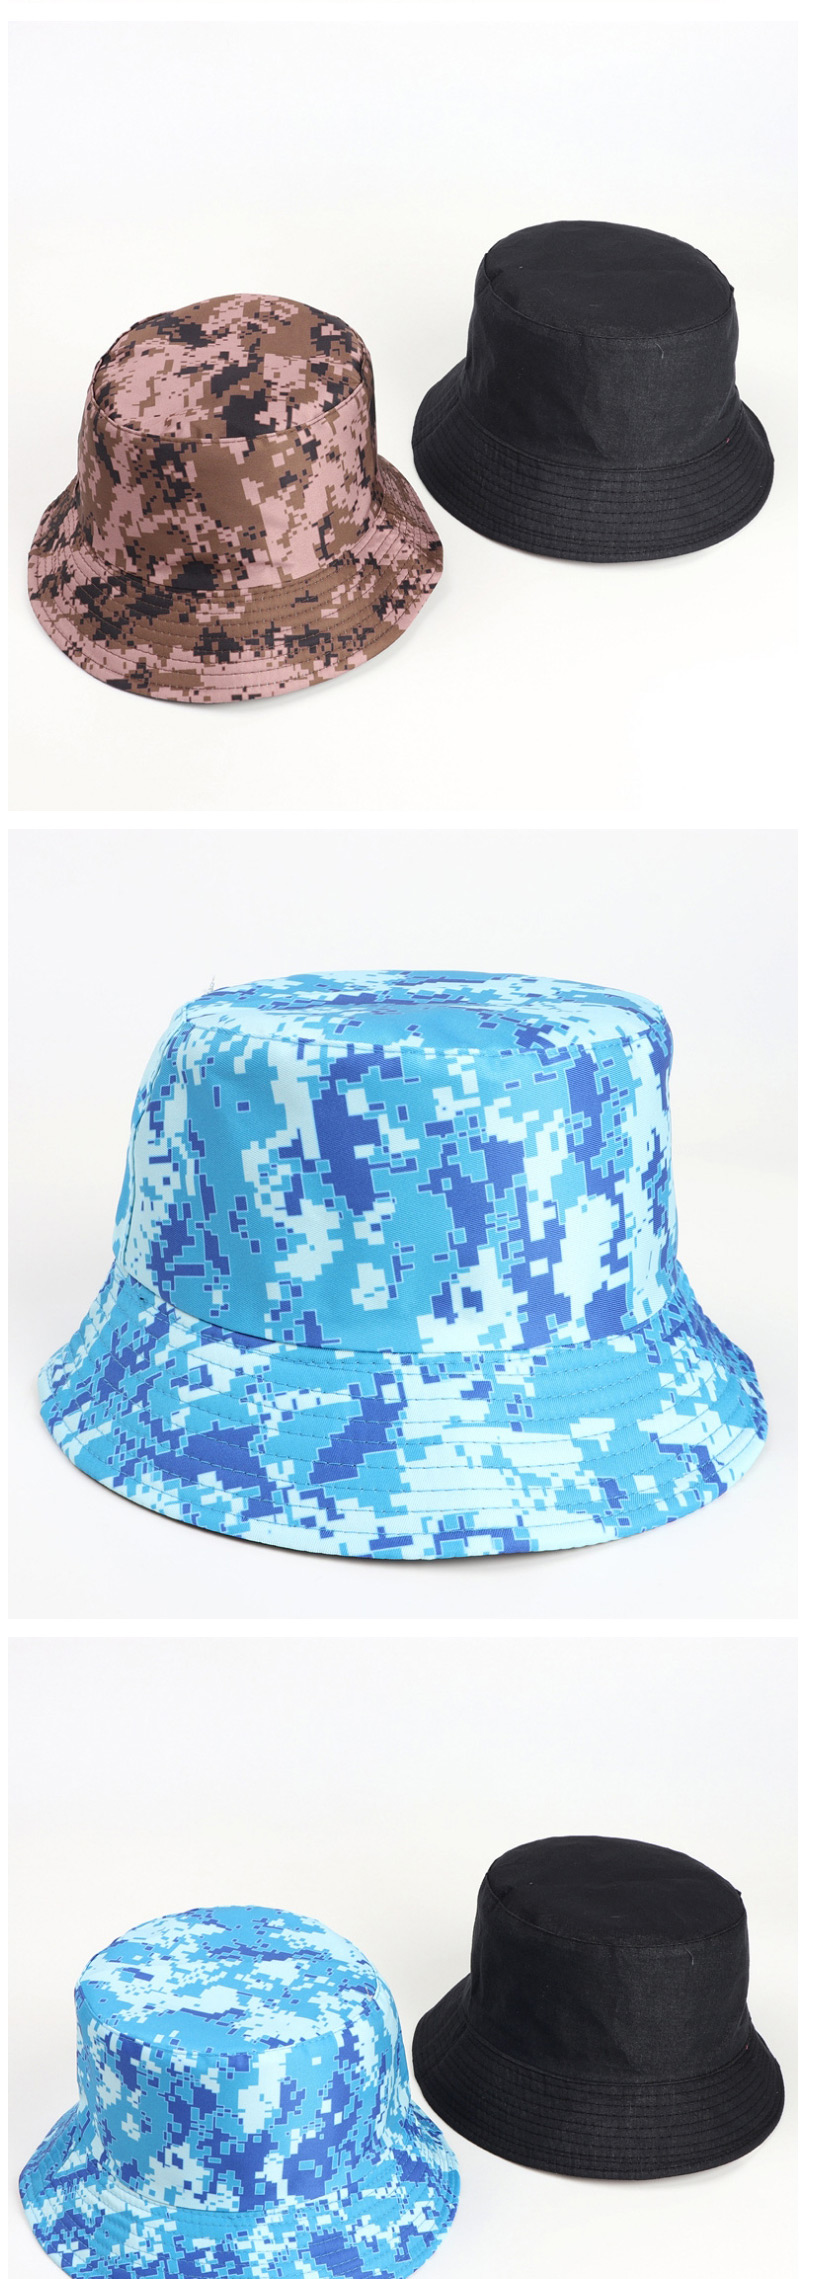 Fashion Pink Printed Double-sided Multicolor Camouflage Fisherman Hat,Sun Hats